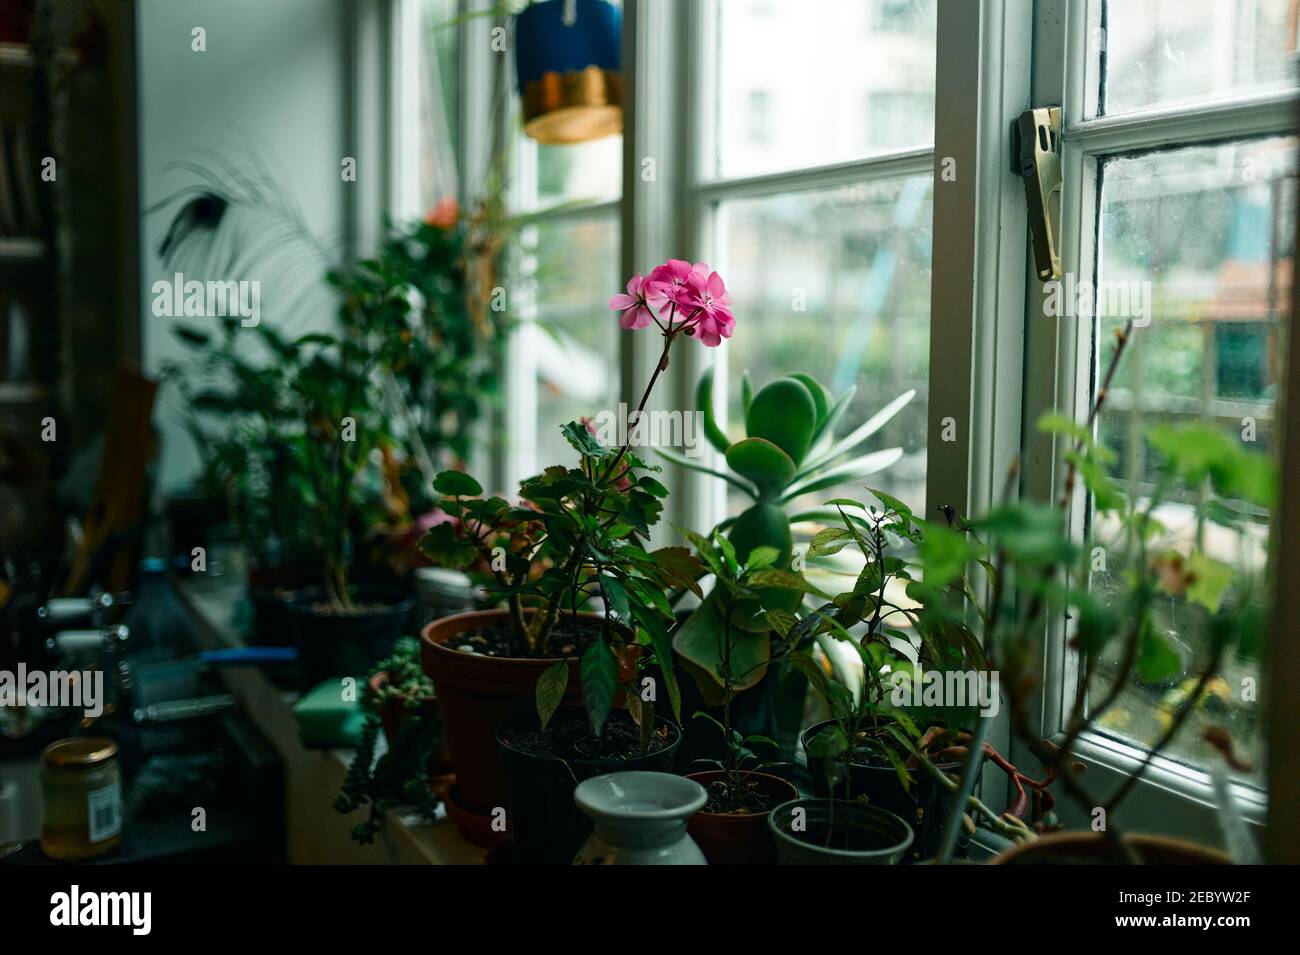 A window sill with potted plants in the sunlight Stock Photo